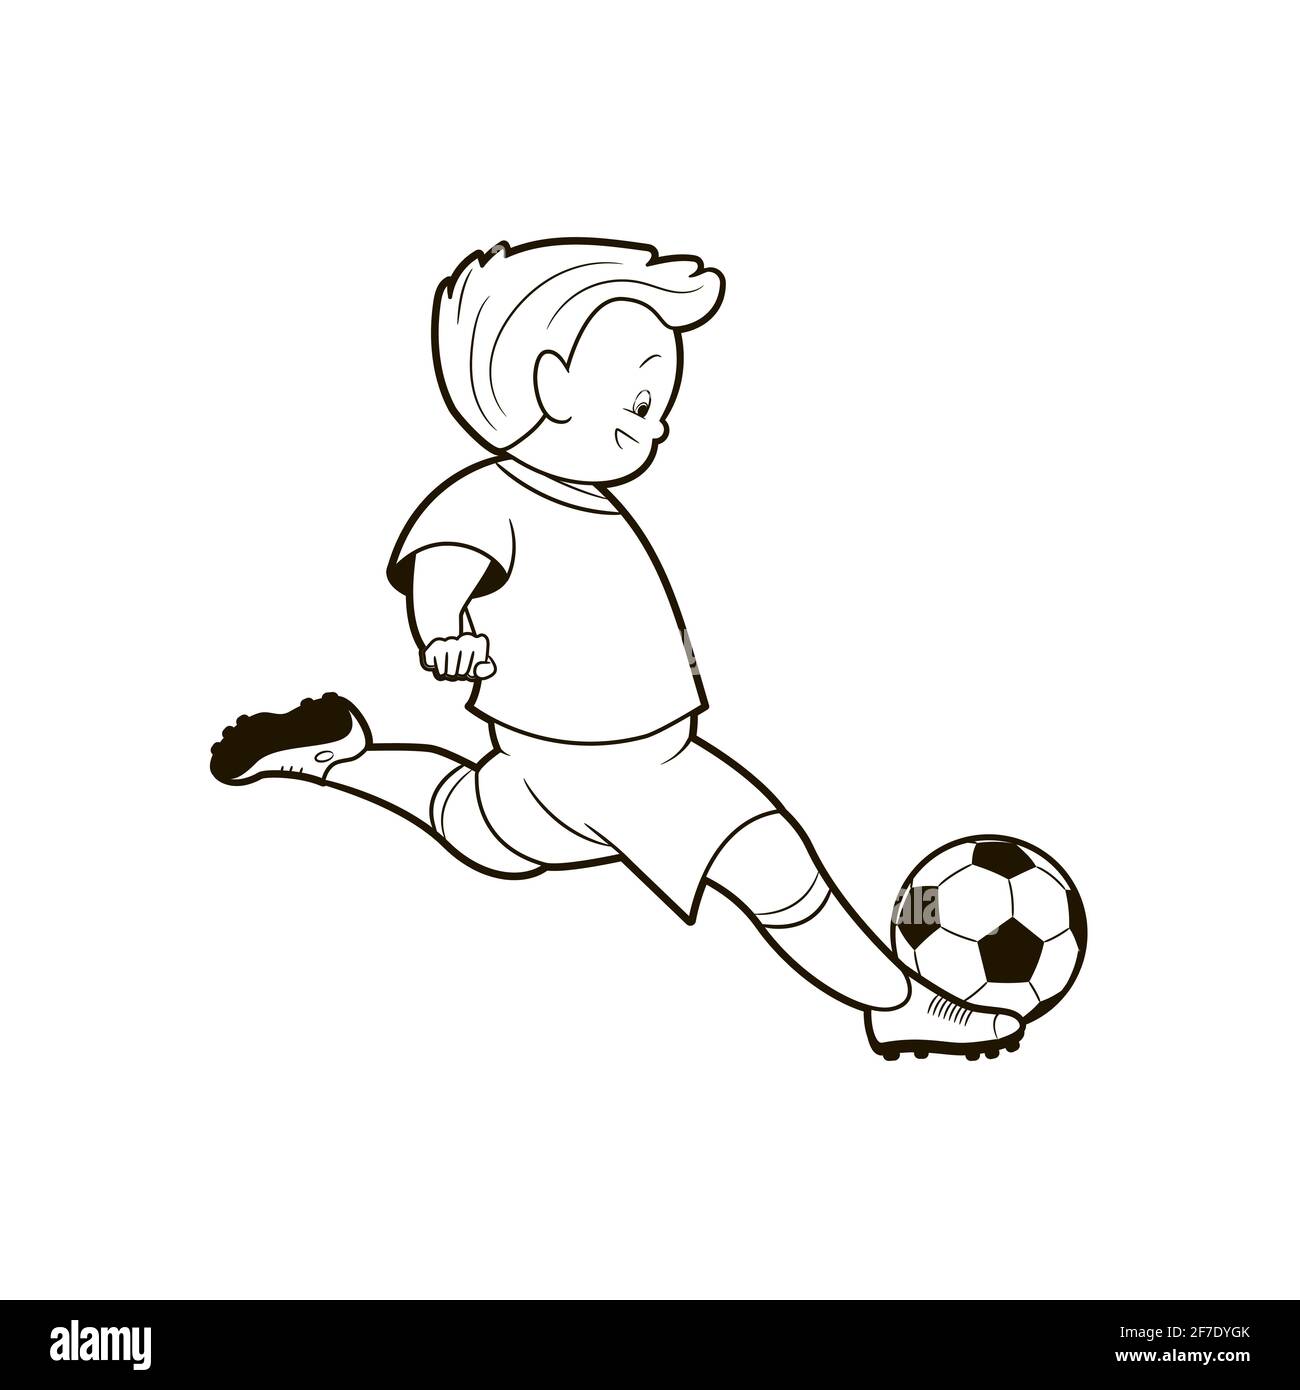 soccer ball coloring pages